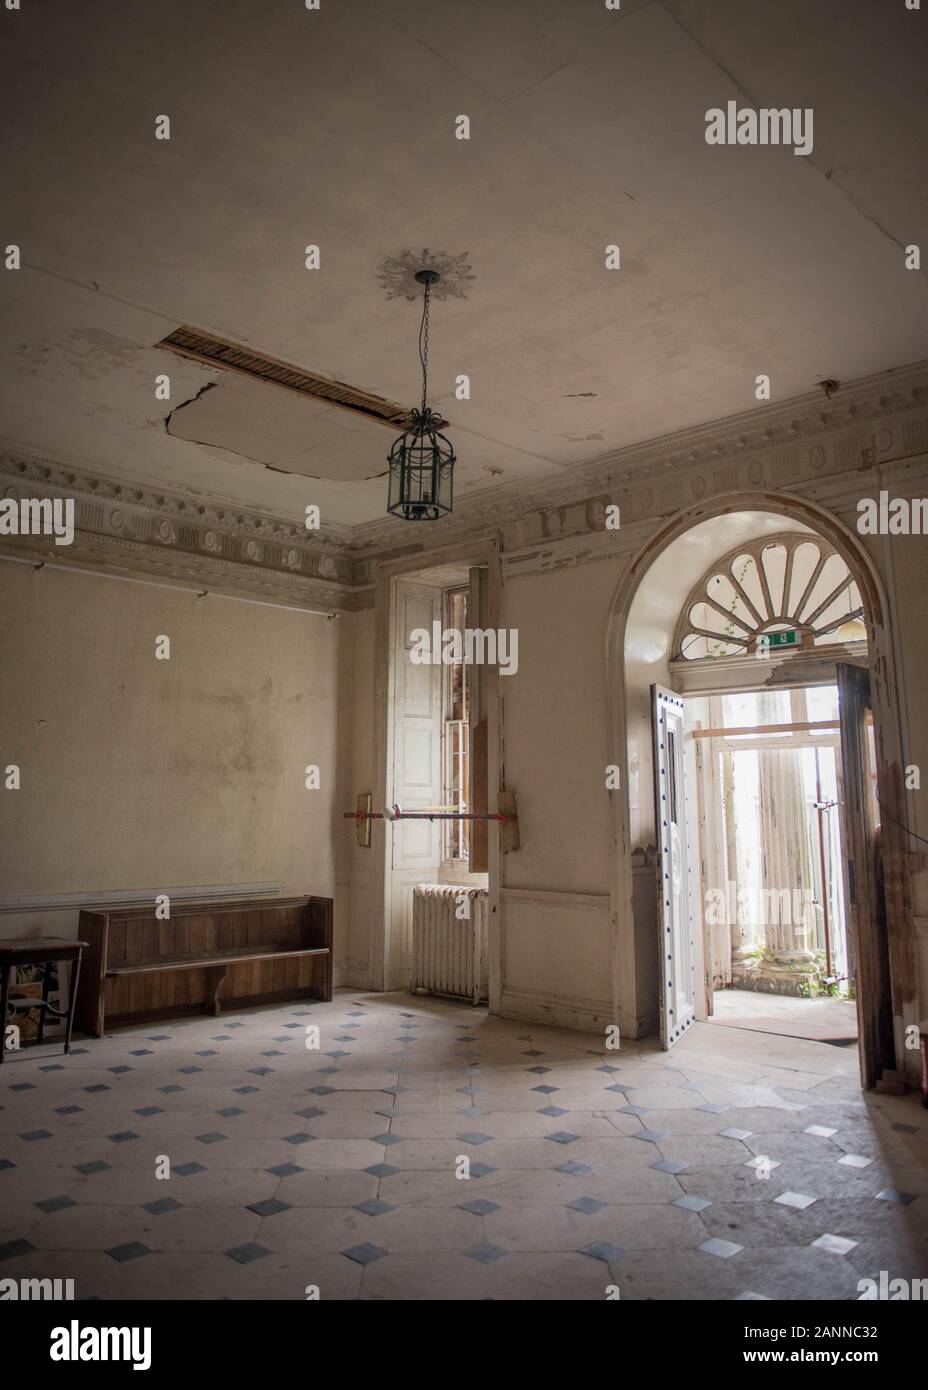 Interior of Poltimore House near Exeter in Devon UK. Currently undergoing attempted renovation but in disrepair and various stages of decline - 2019 Stock Photo